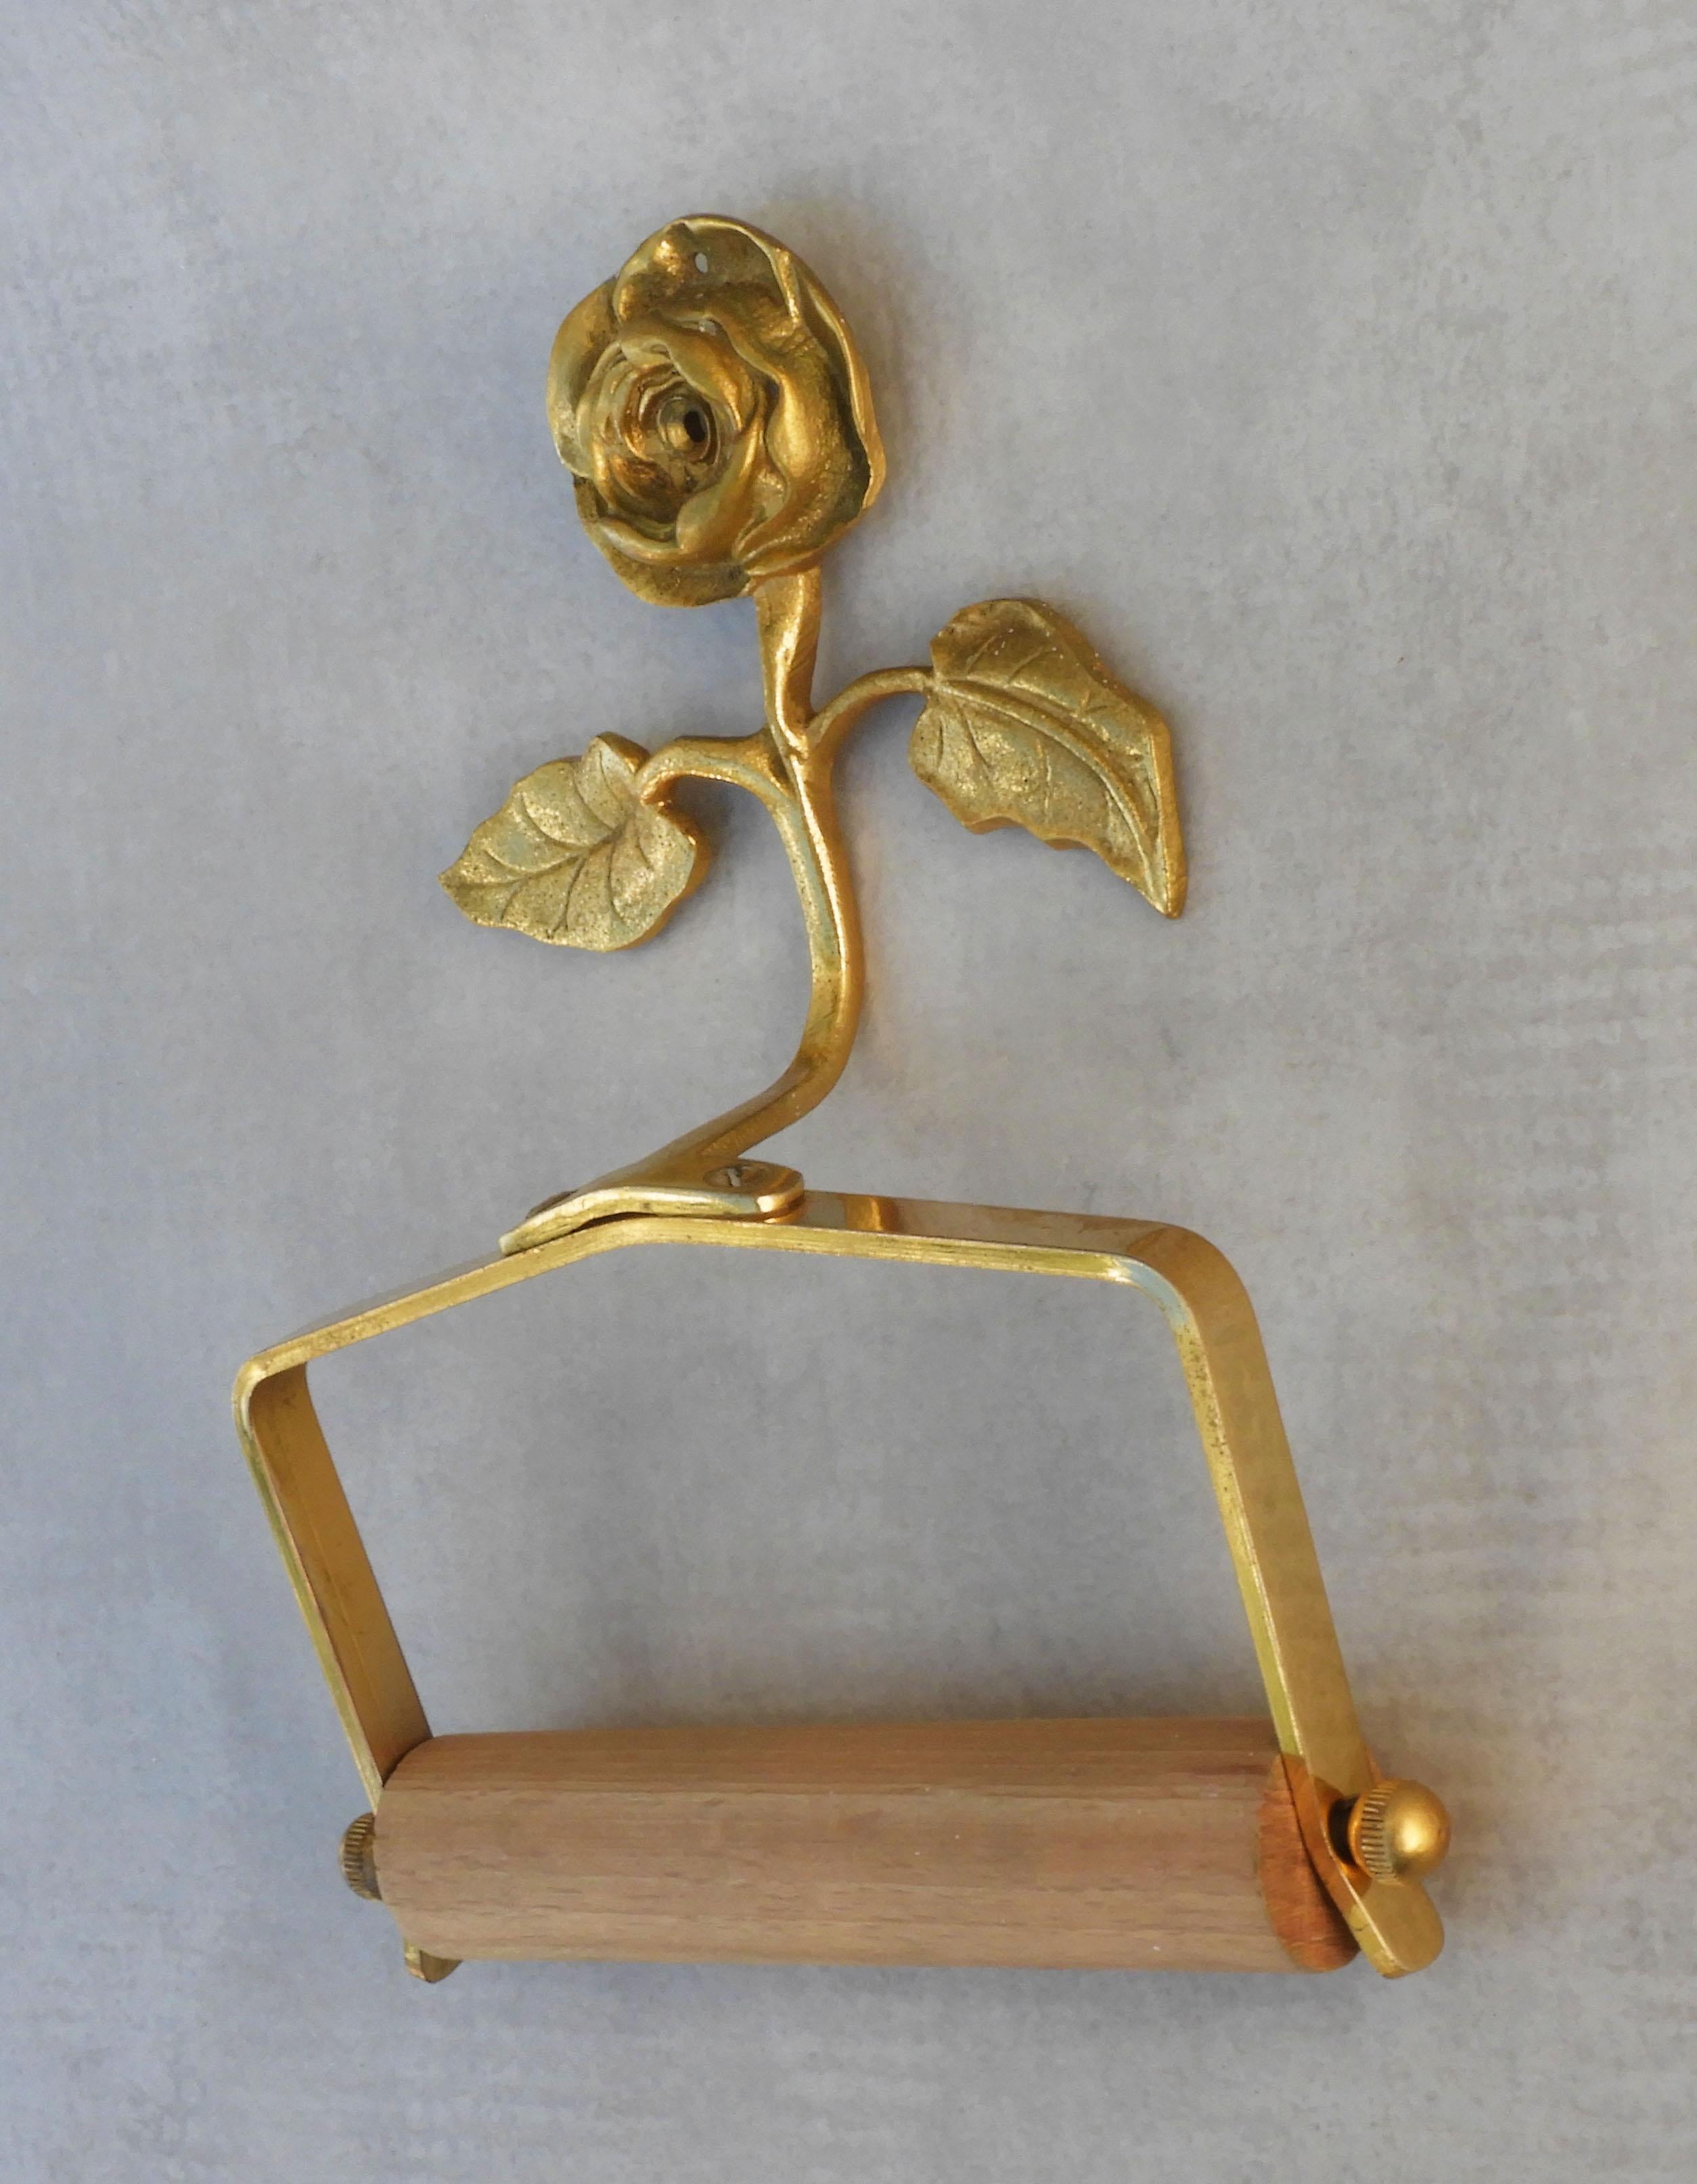 Charming French mid-century rose toilet paper holder in gilded brass C1950.   Part of a selection of bathroom accessories and wall light sconces available in the same style  - please see our other listings. 
In good vintage condition with only light